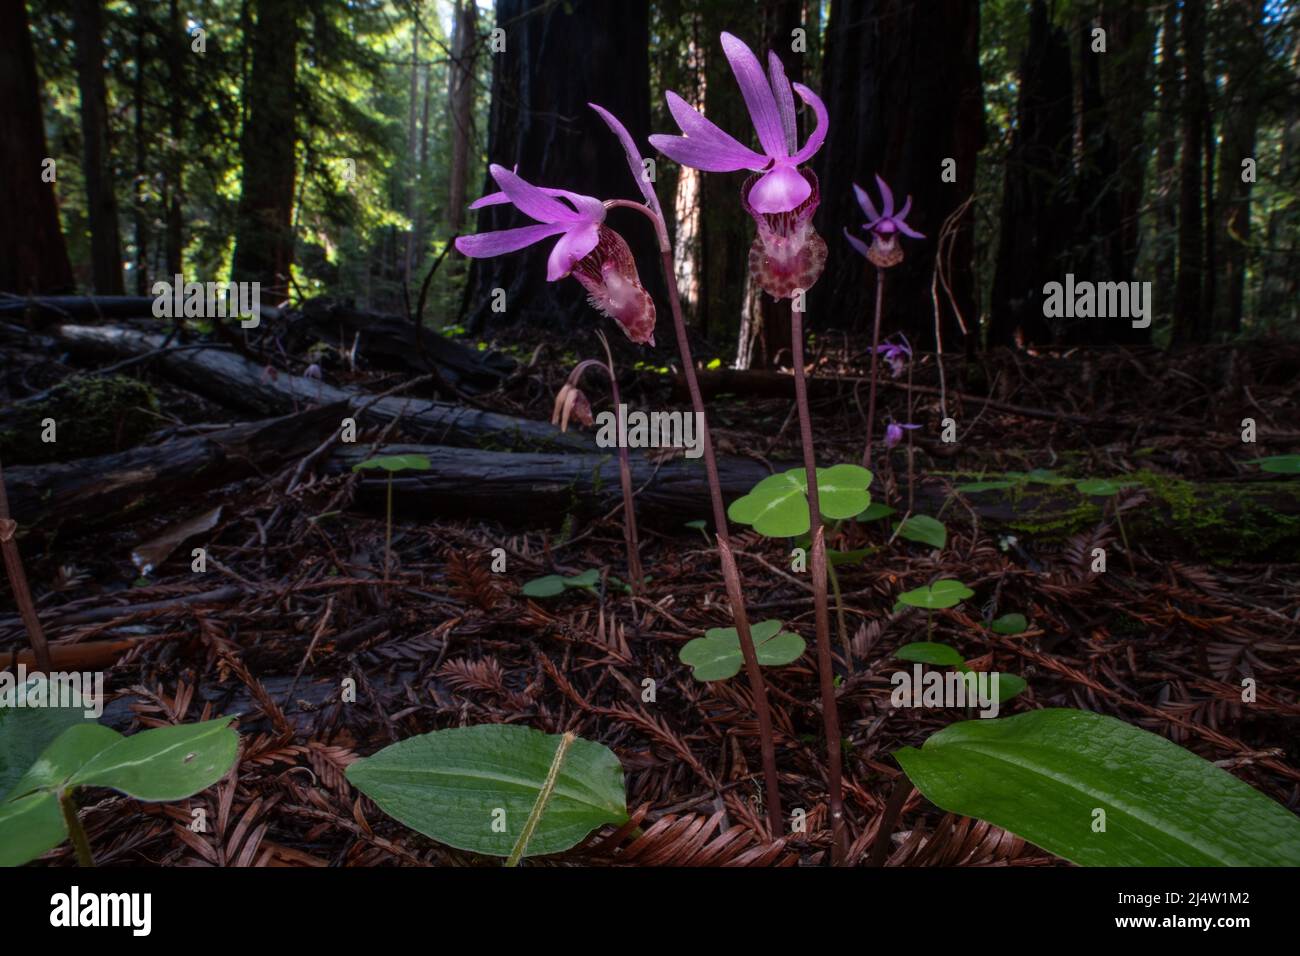 The fairy slipper orchid (Calypso bulbosa) blooming and flowering on the redwood forest floor in Northern California, USA, North America. Stock Photo